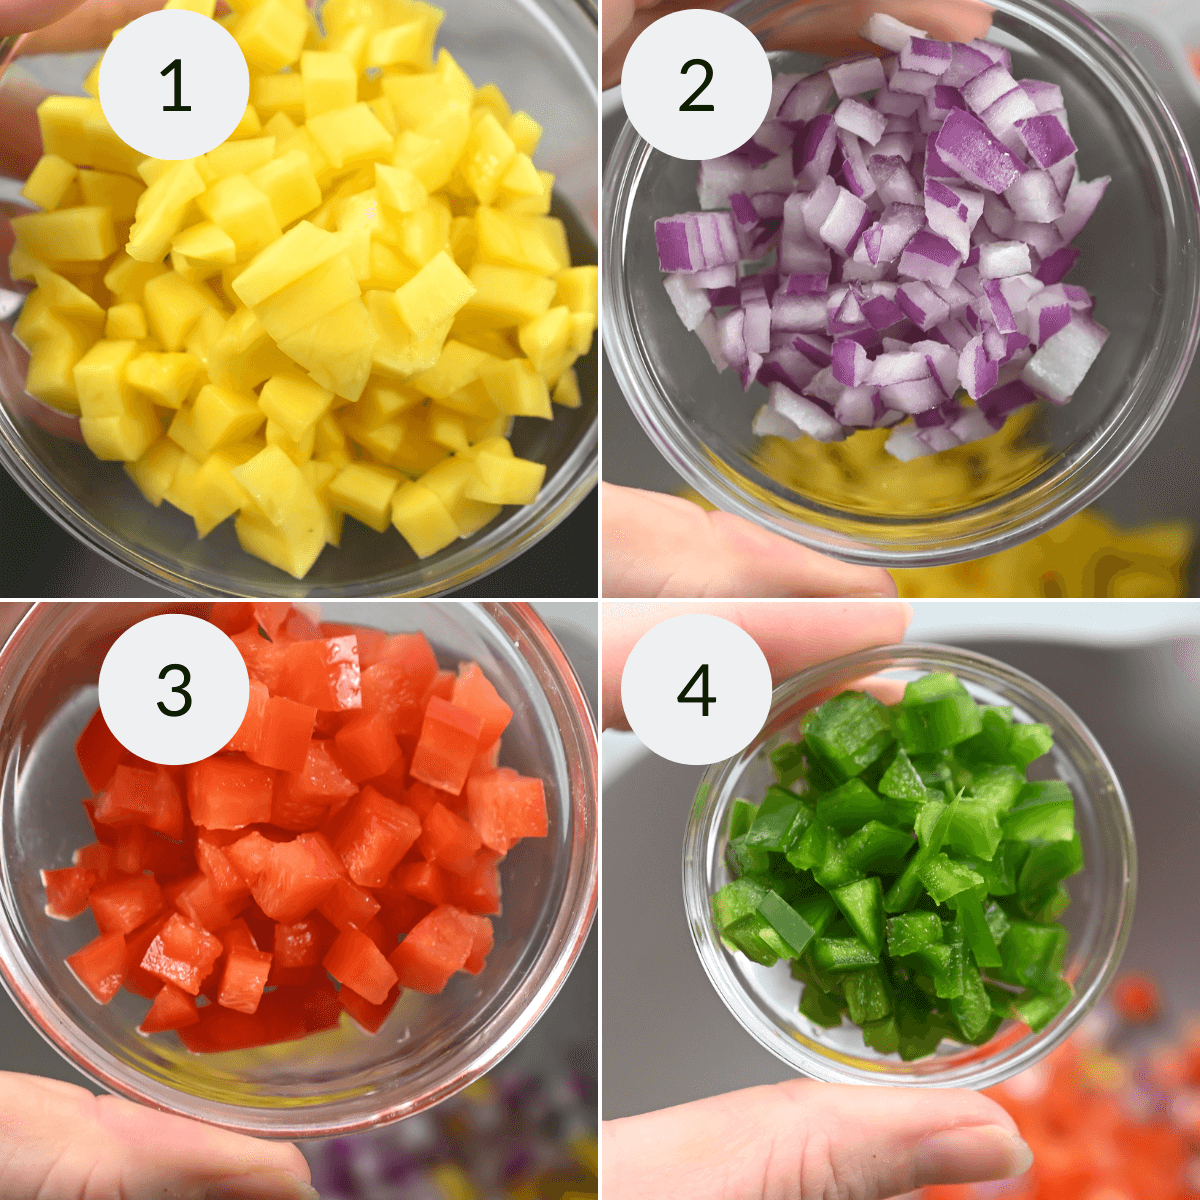 Four images displaying different chopped ingredients for a chipotle chicken salad: 1) mango, 2) red onion, 3) tomato, 4) green bell pepper.